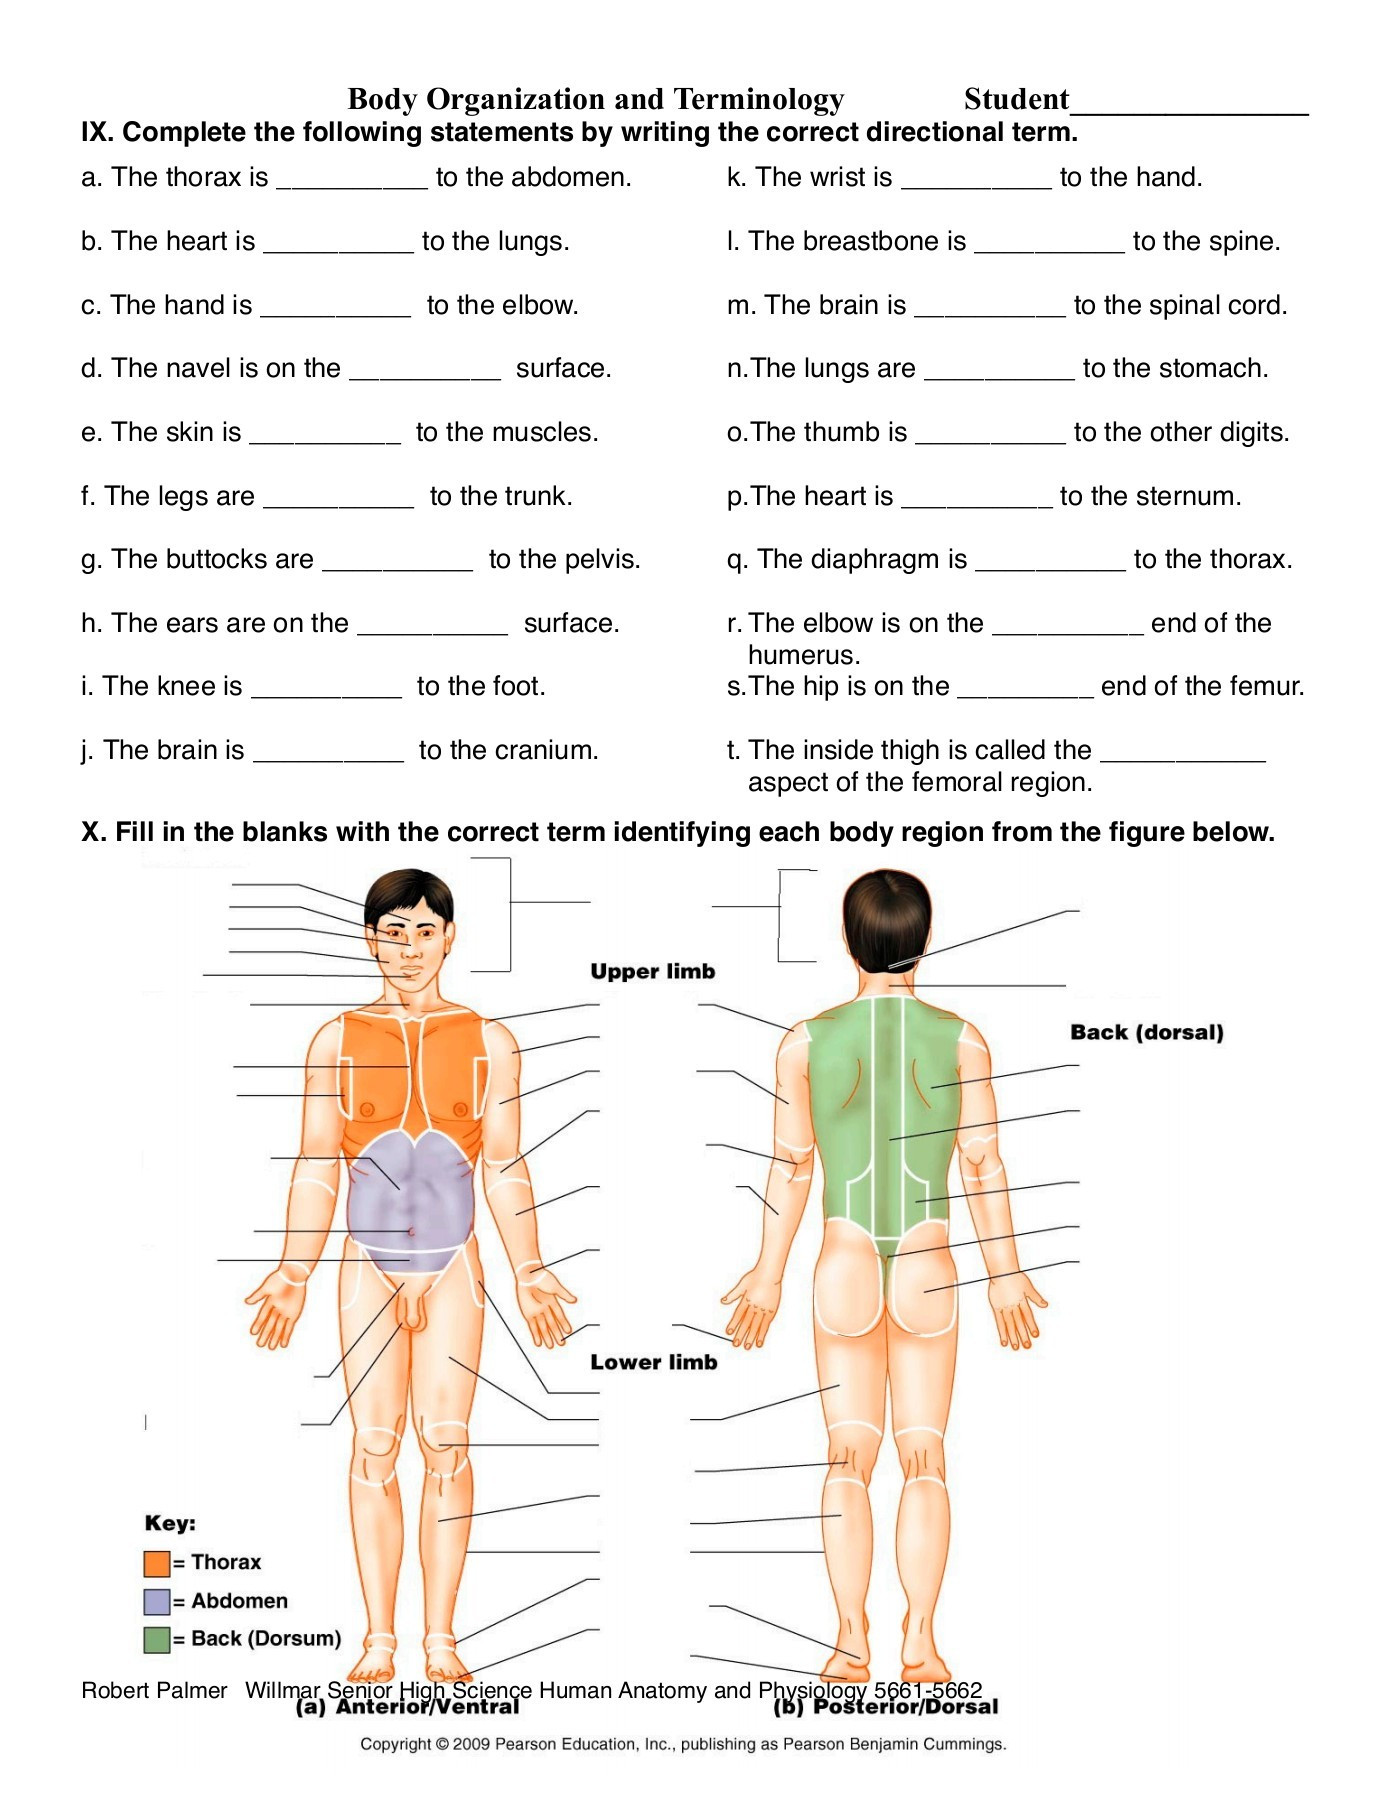 Anatomical Terms Worksheet Answers Anatomy Directional Terms Worksheet Answers Anatomy